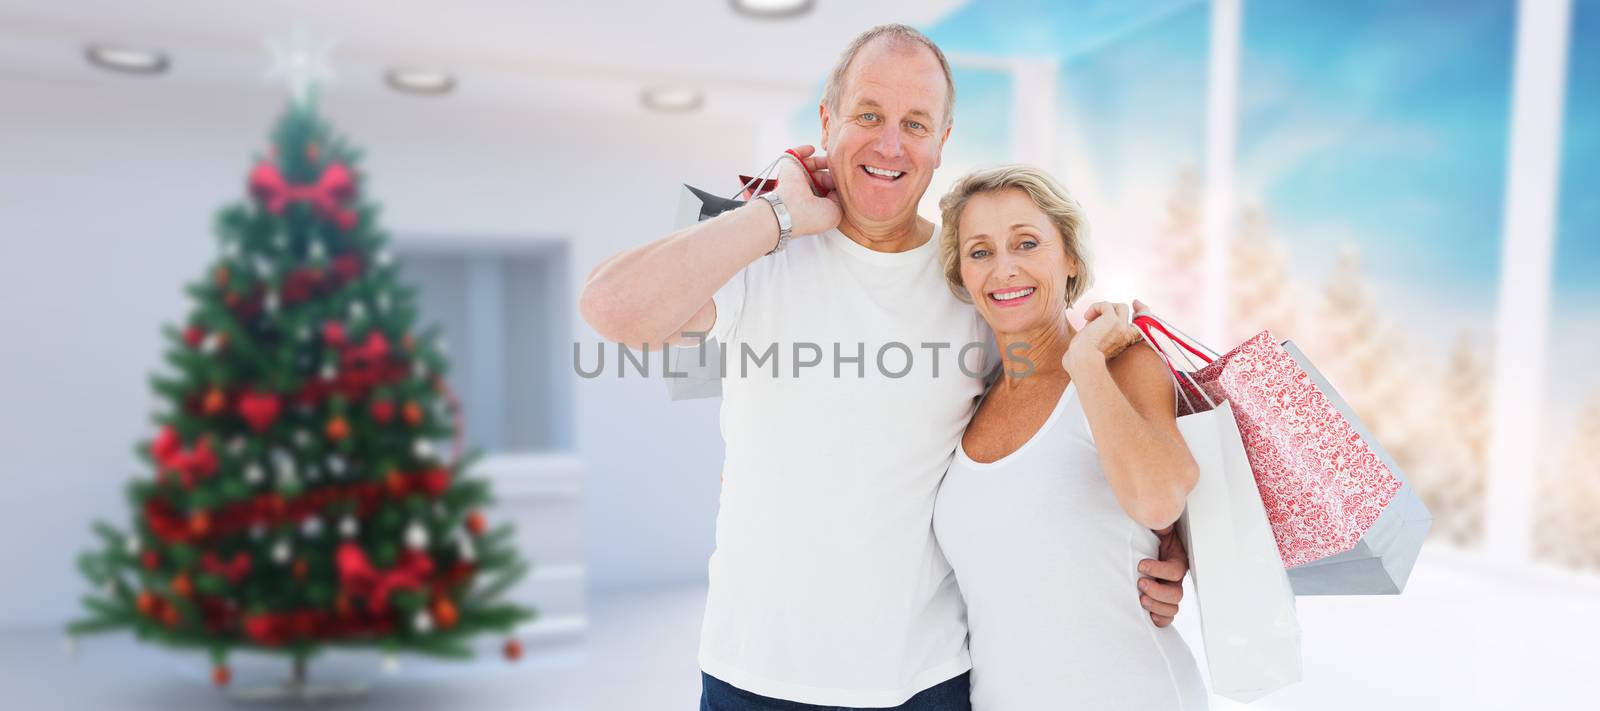 Composite image of couple with shopping bags by Wavebreakmedia